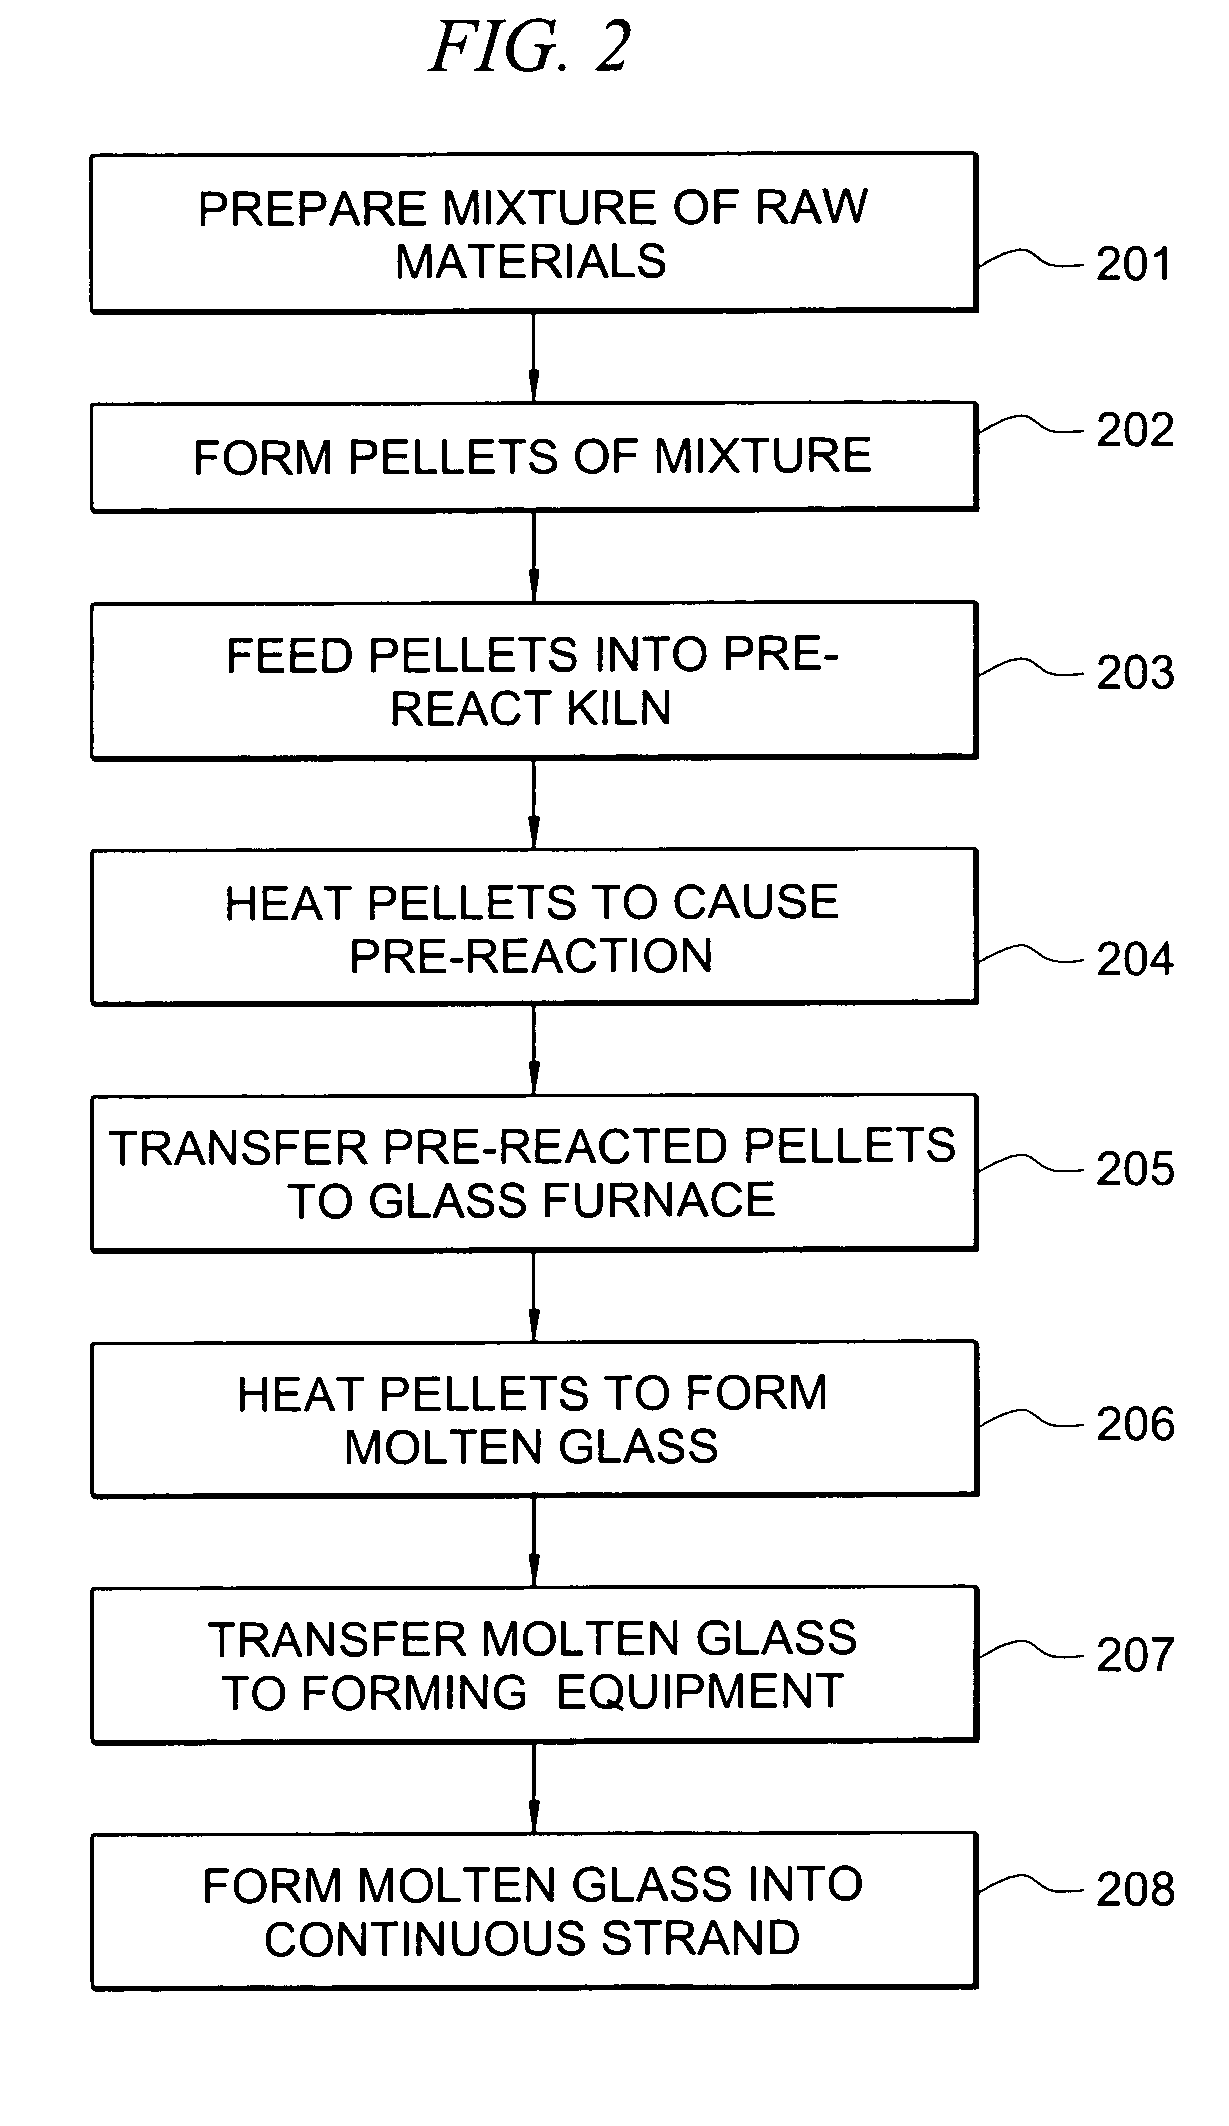 Use of pre-reacted cements as raw material for glass production and the manufacture of fiber therefrom